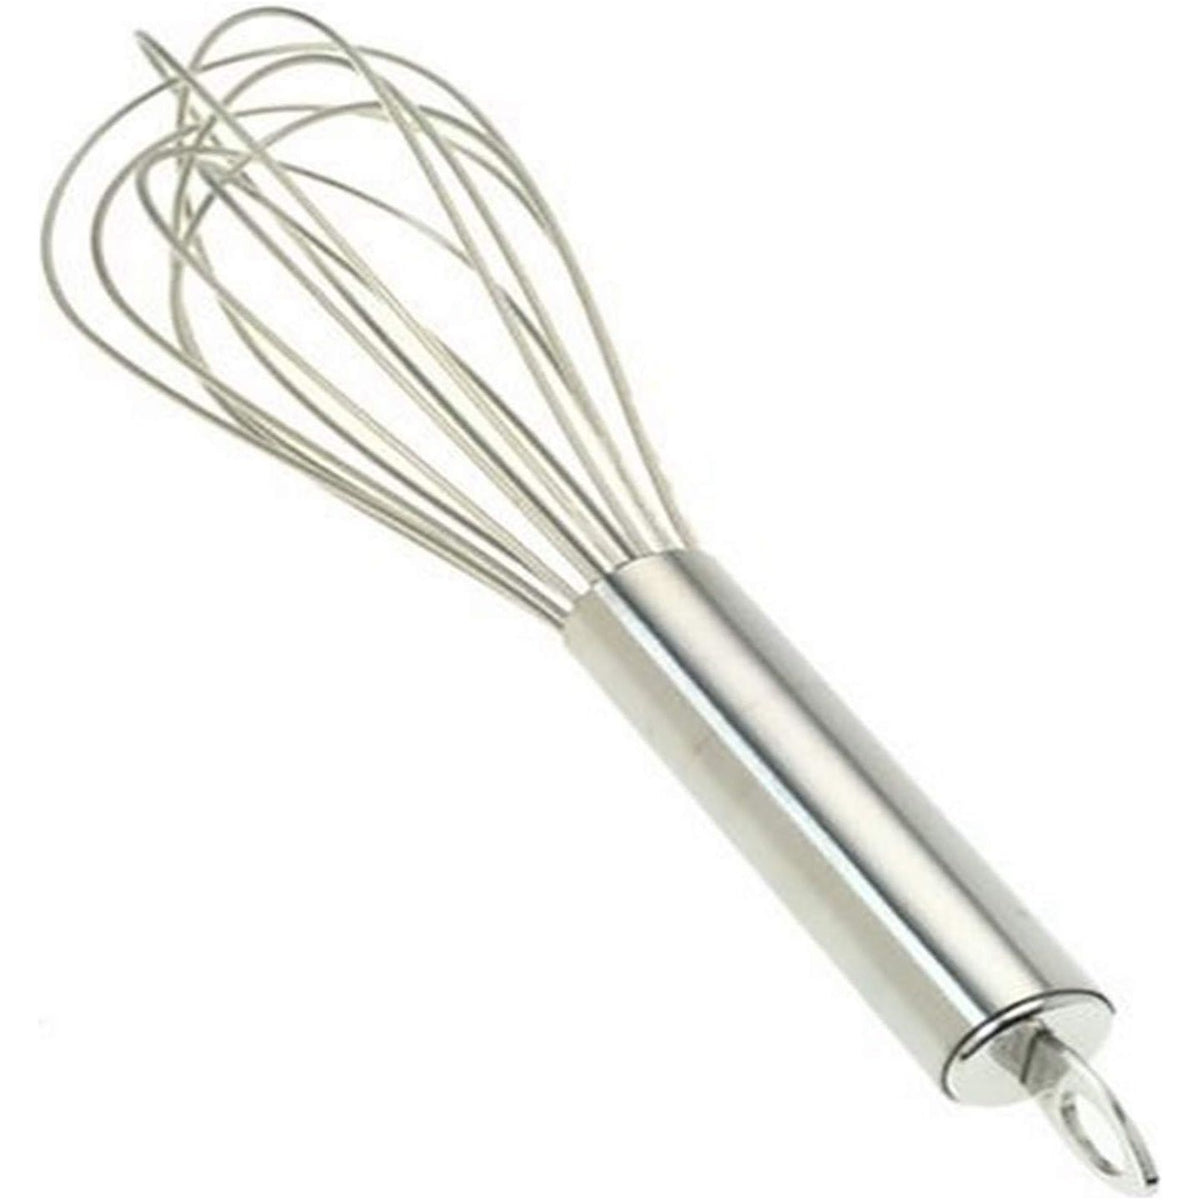 Tovolo 10 Sauce Whisk